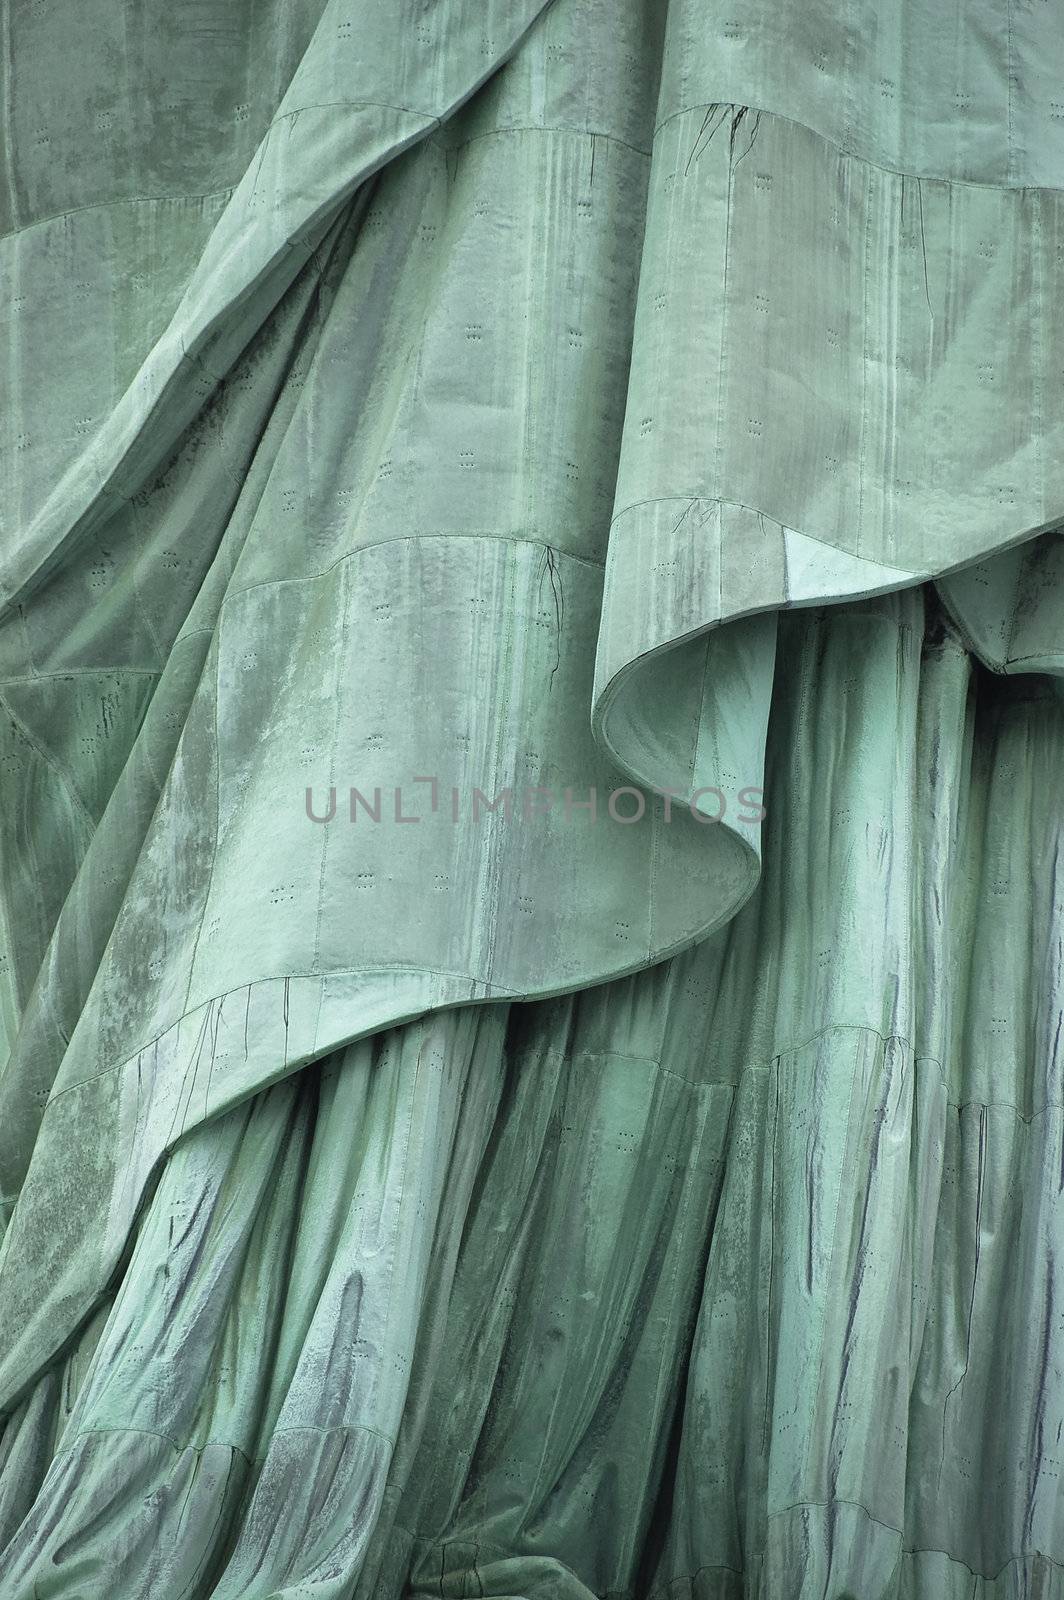 Close-up, lower section of Statue of Liberty's robe on Liberty Island, New York City, USA